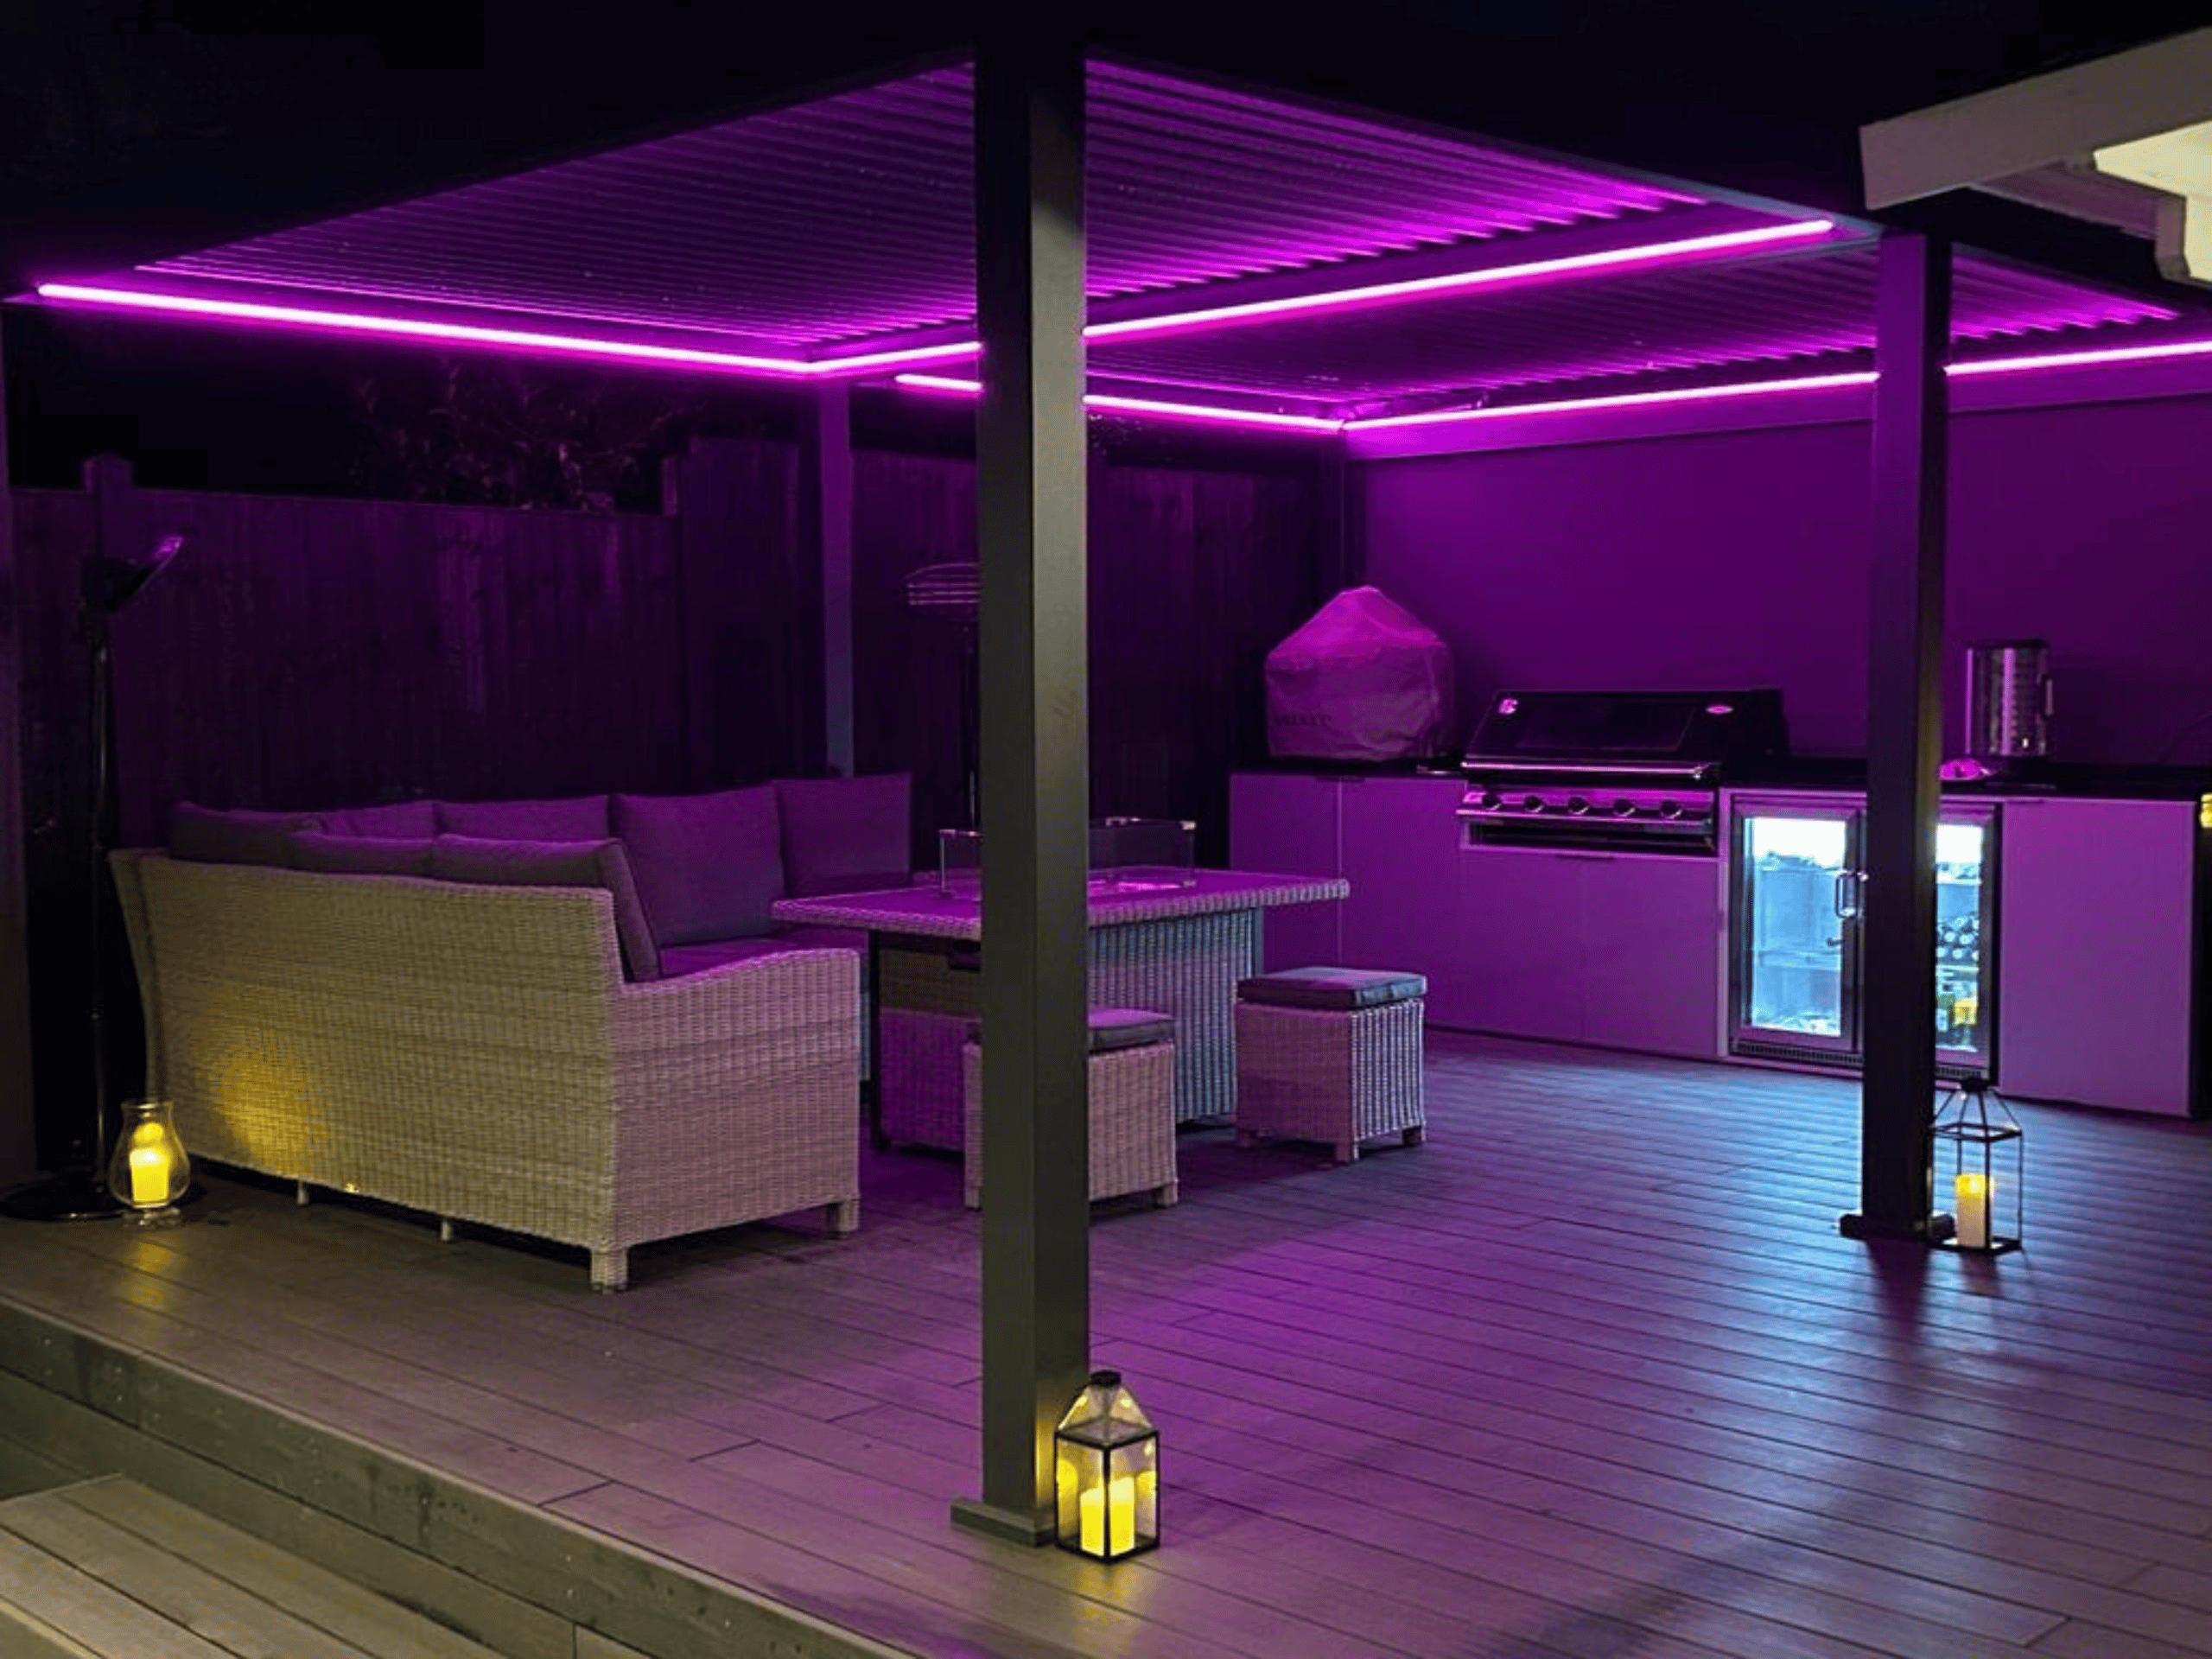 Outdoor entertaining area and kitchen under purple LED light from the pergola. Featuring an outdoor seat and table and straight run of kitchen